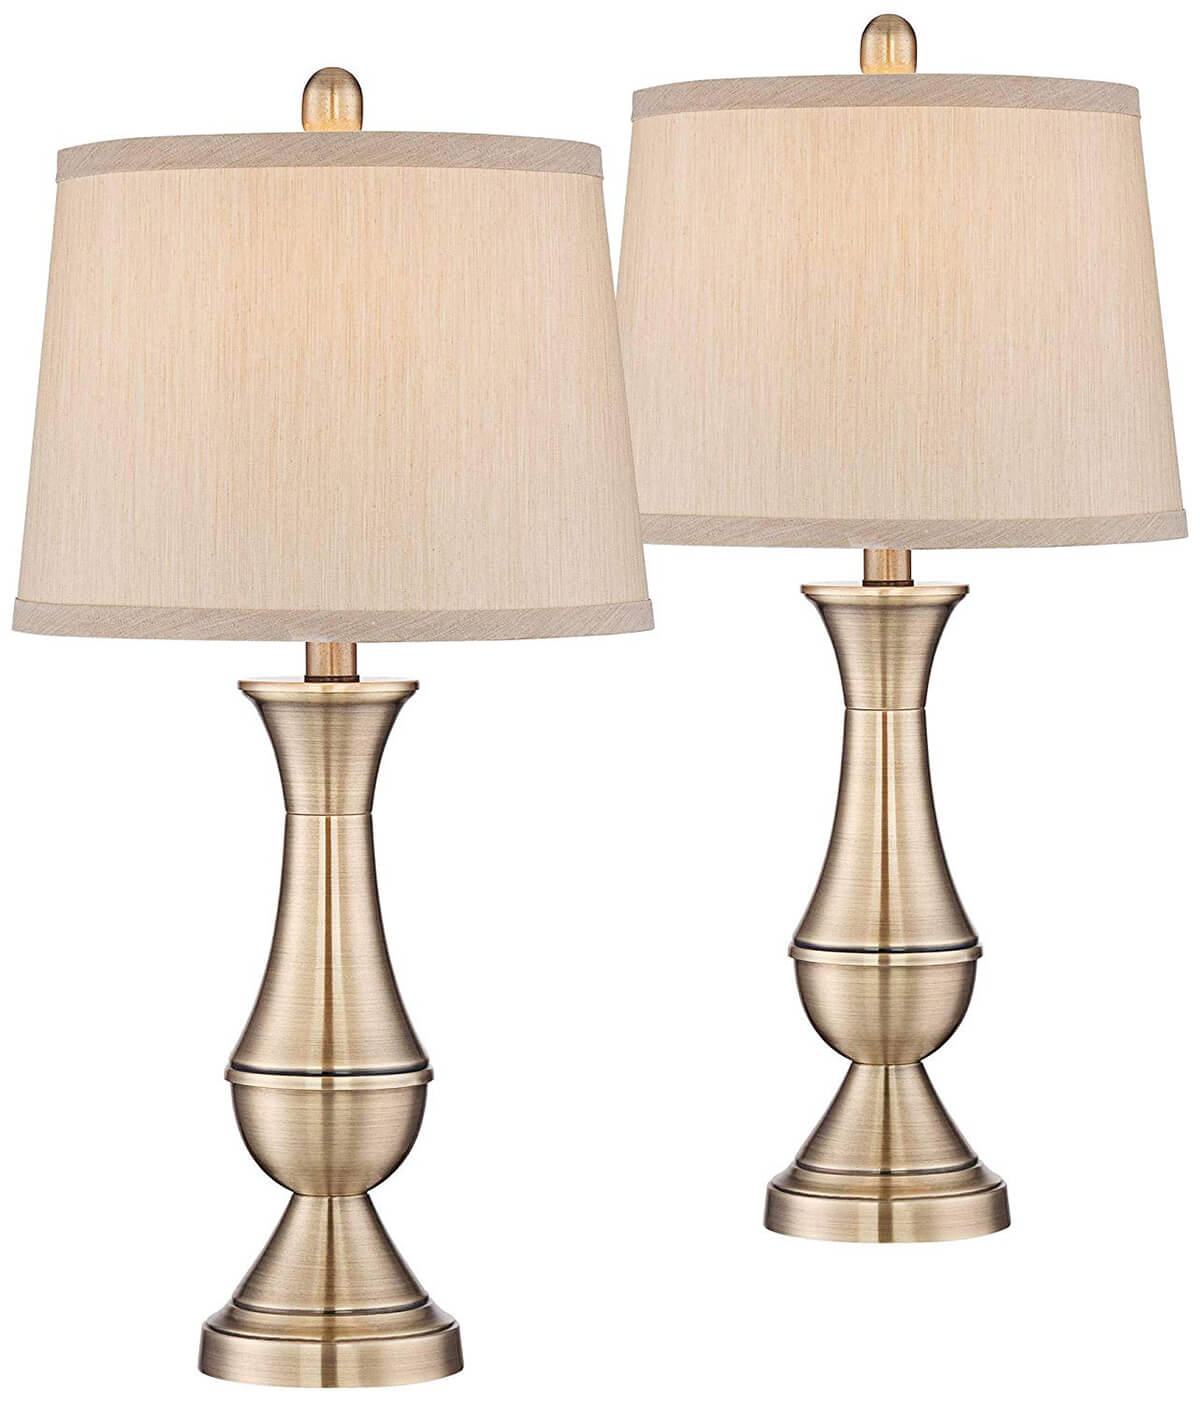 Set of Two Traditional Table Lamps